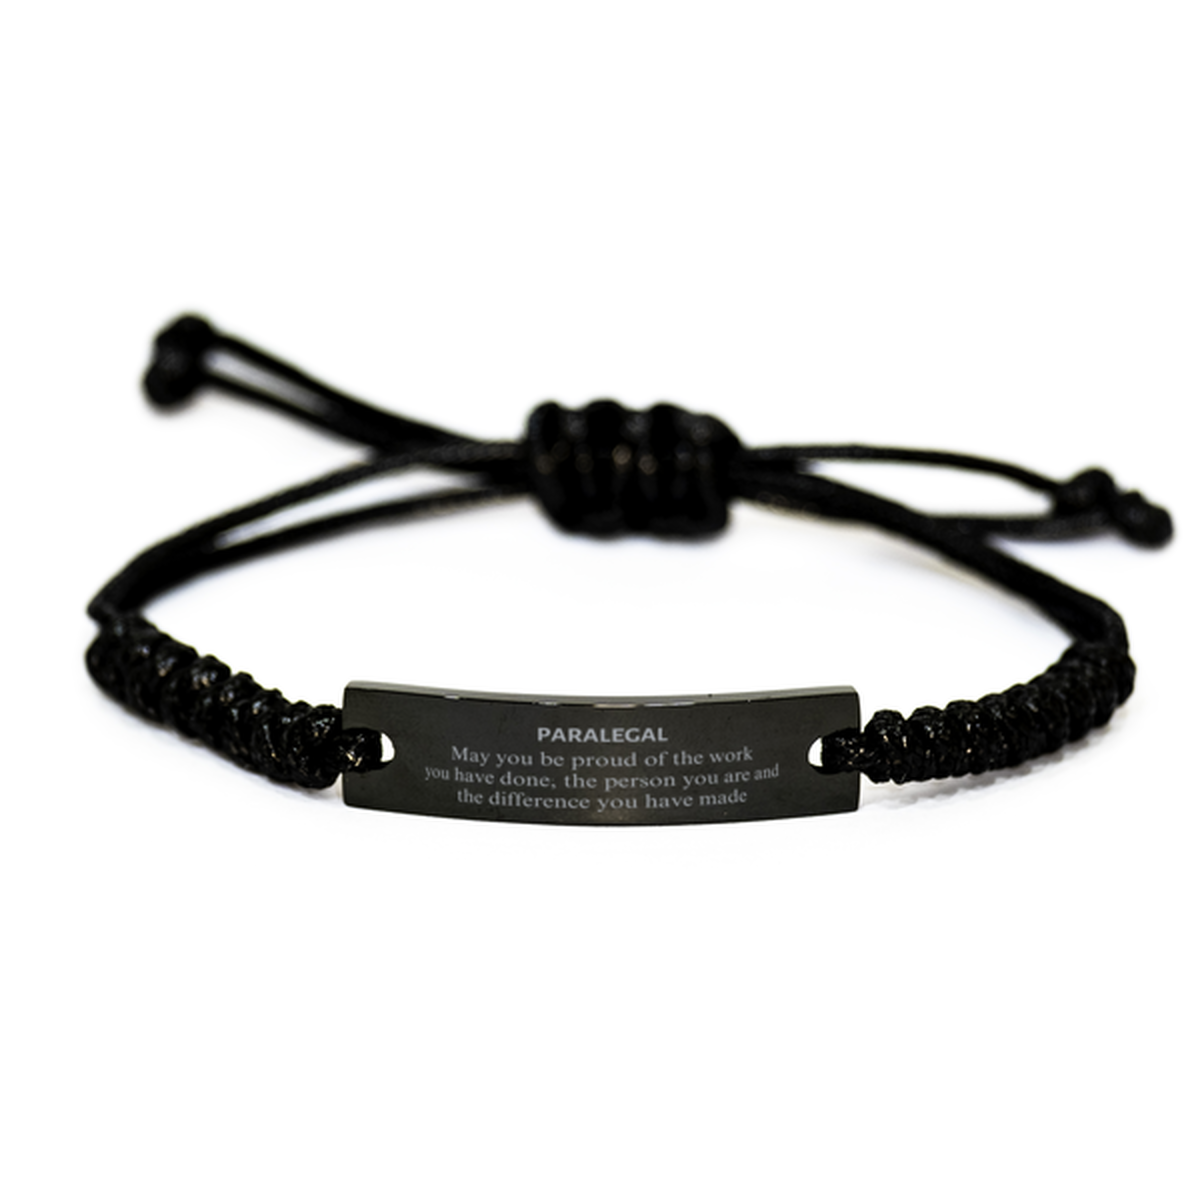 Paralegal May you be proud of the work you have done, Retirement Paralegal Black Rope Bracelet for Colleague Appreciation Gifts Amazing for Paralegal